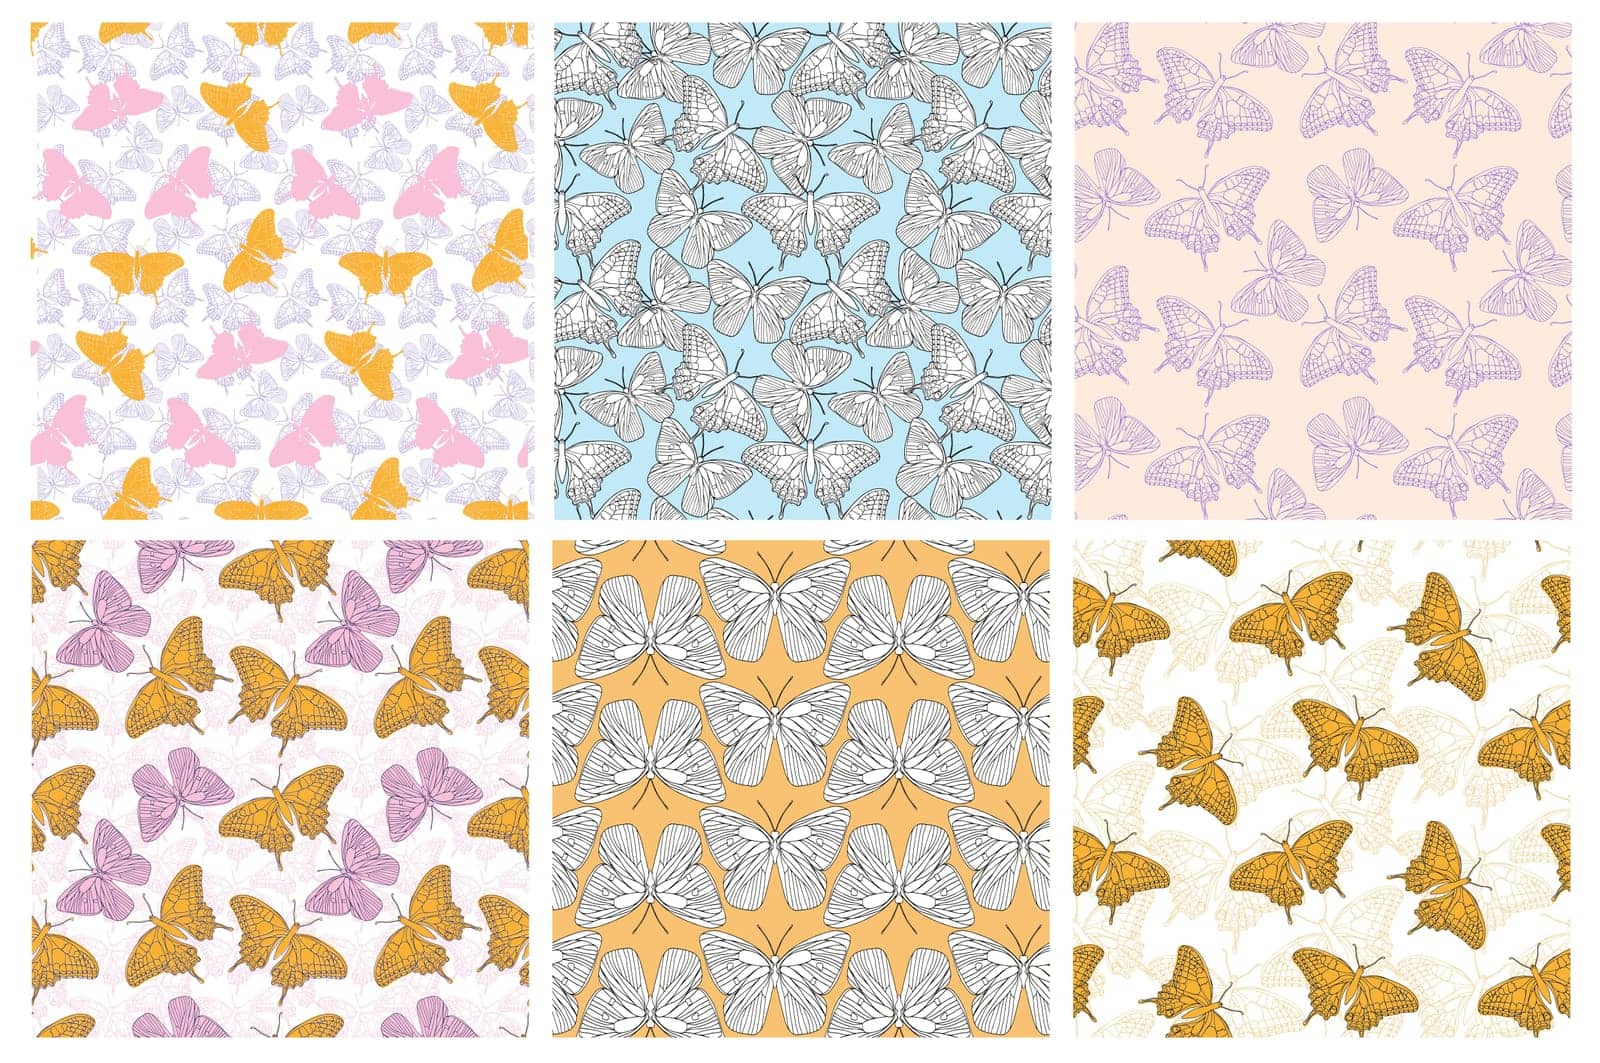 Butterflies ink line vector seamless pattern set background for textile, fabric, wallpaper, scrapbook. Insects with wings drawing for surface design. by MintanArt